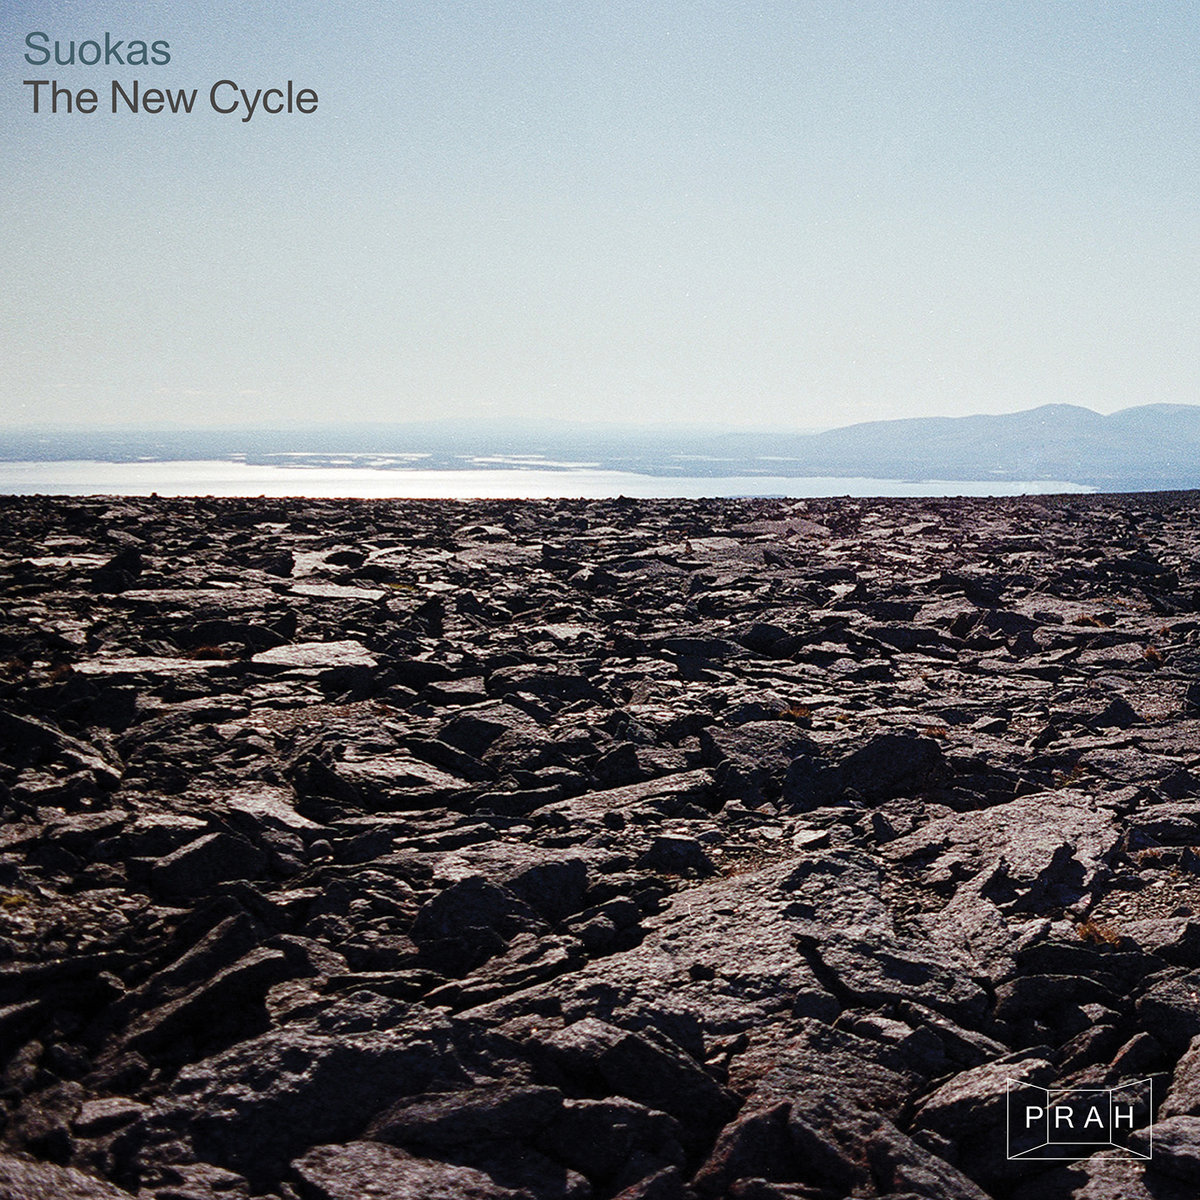 Techno played by an orchestra: listen to the first track from the upcoming album by Suokas